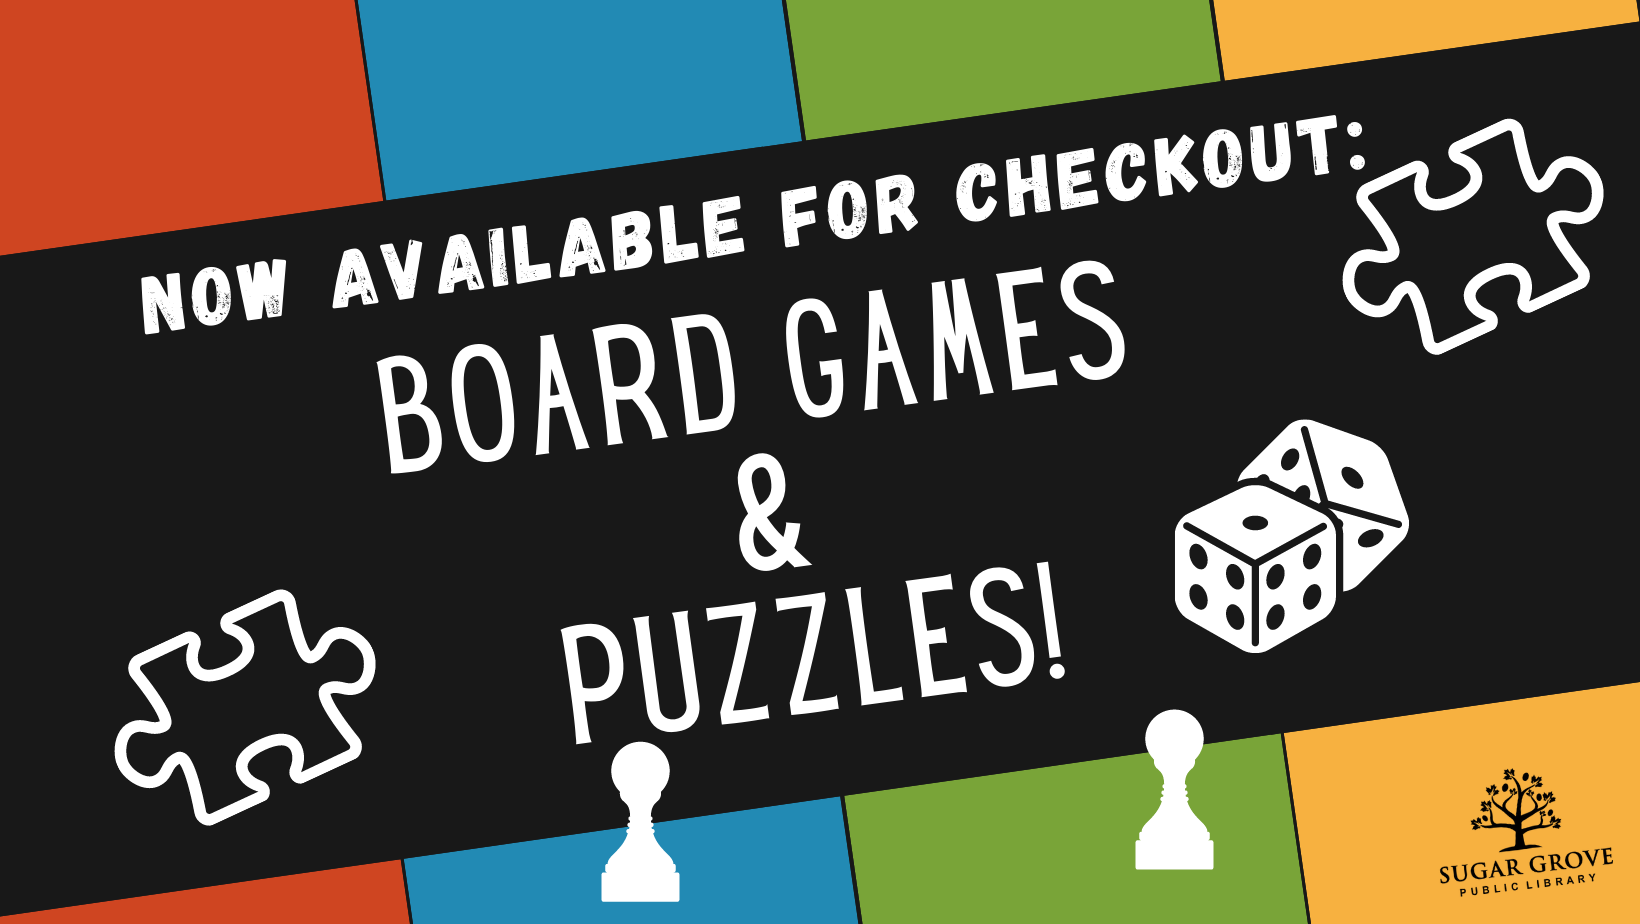 board games and puzzles available now!